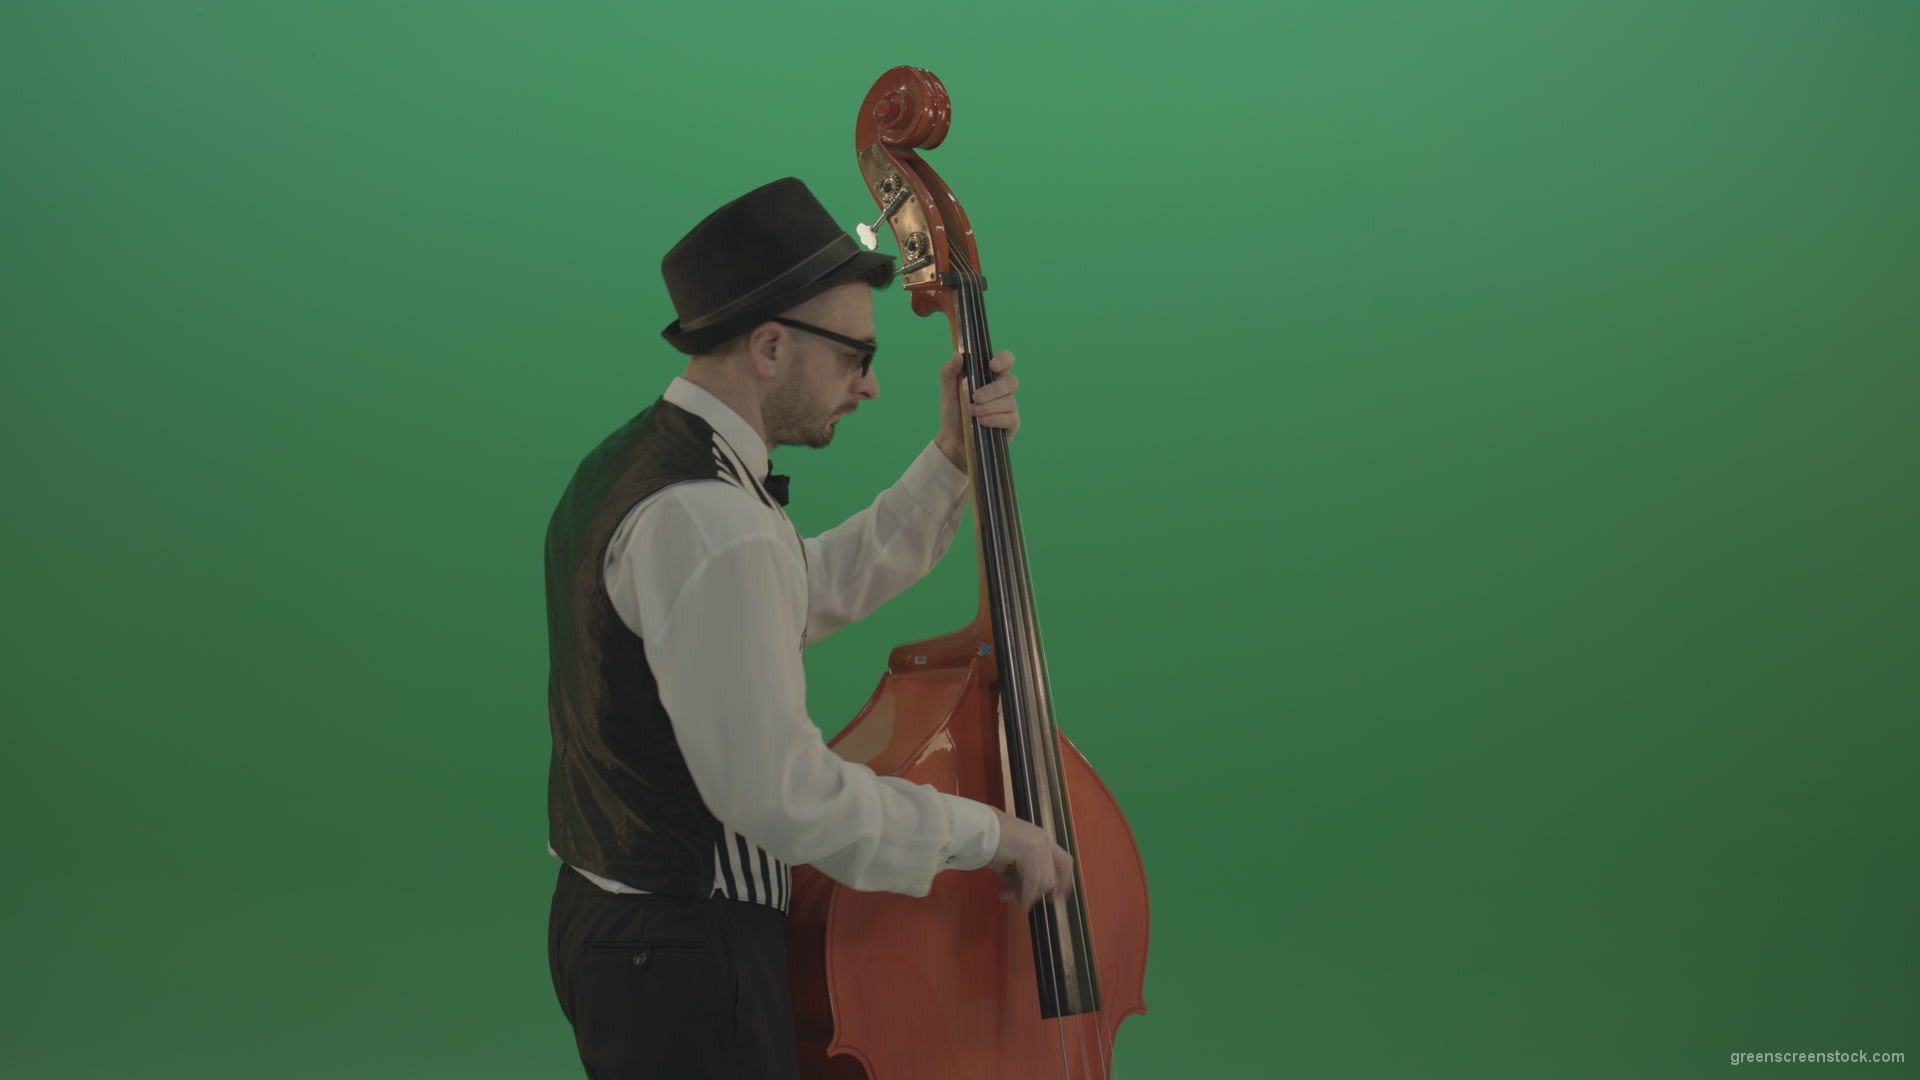 Young-Man-play-jazz-on-double-bass-String-music-instrument-isolated-on-green-screen-in-back-side-view_006 Green Screen Stock